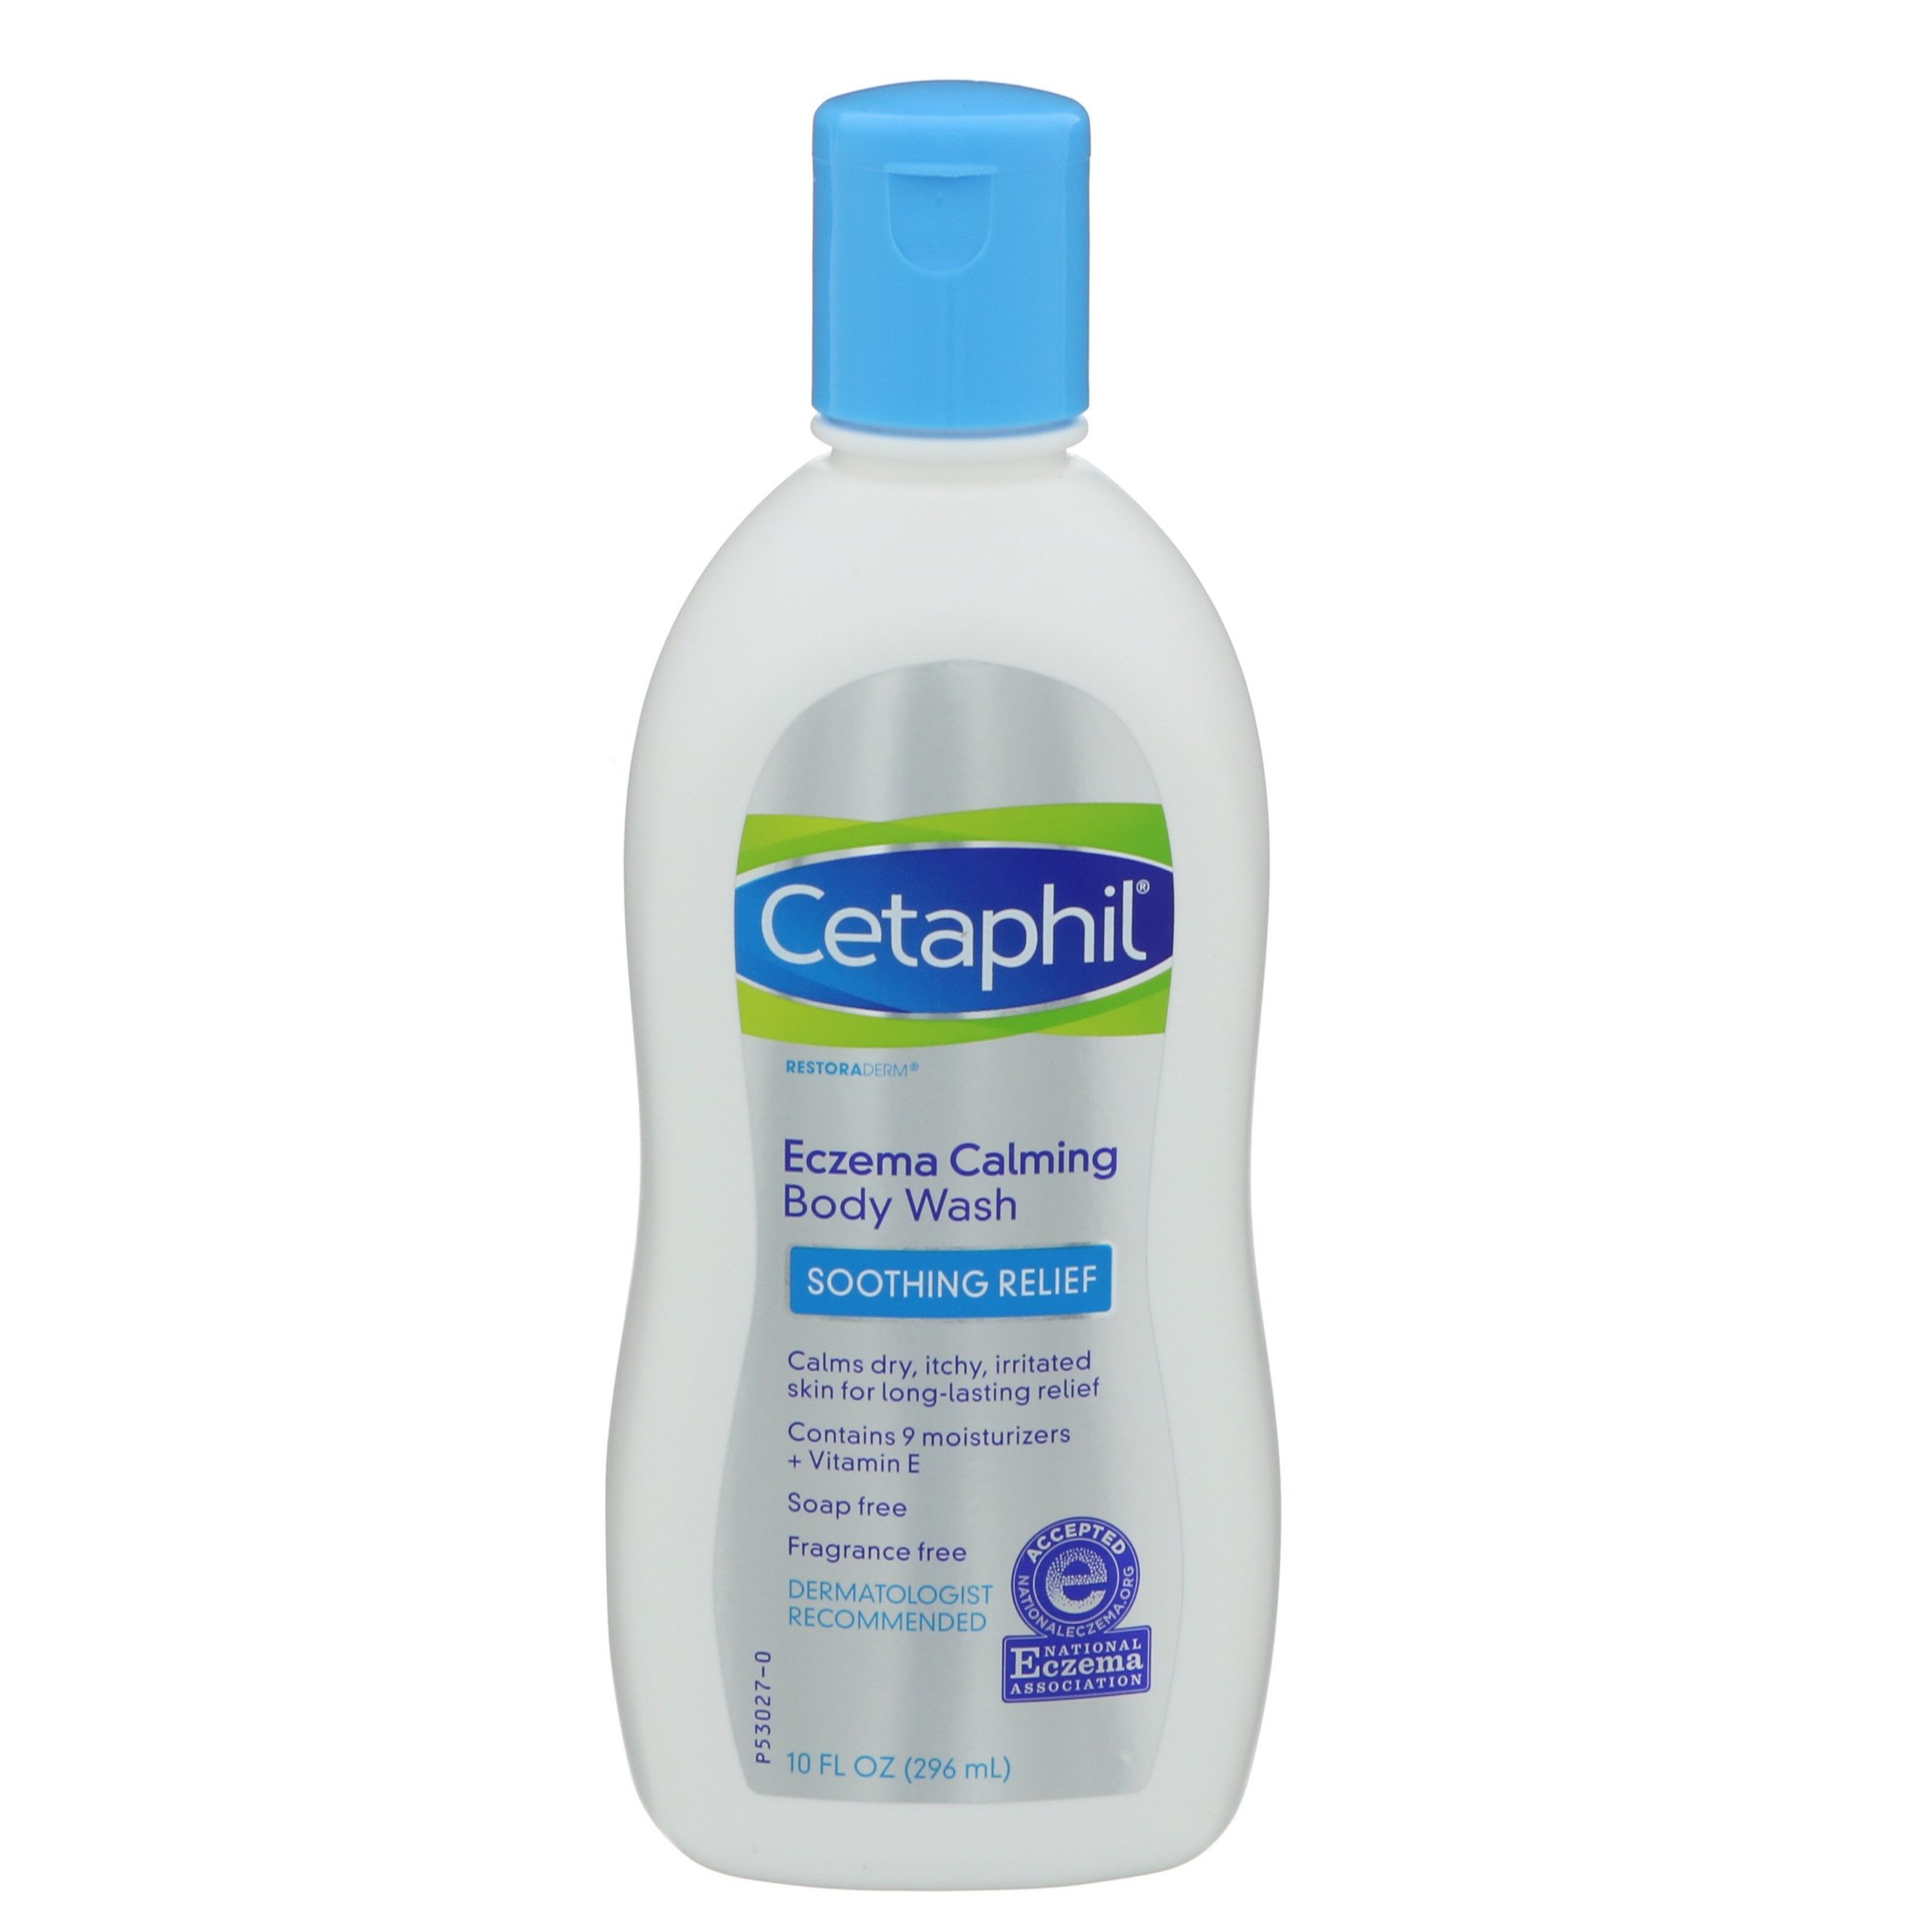 Cetaphil Eczema Calming Body Wash Soothing Relief